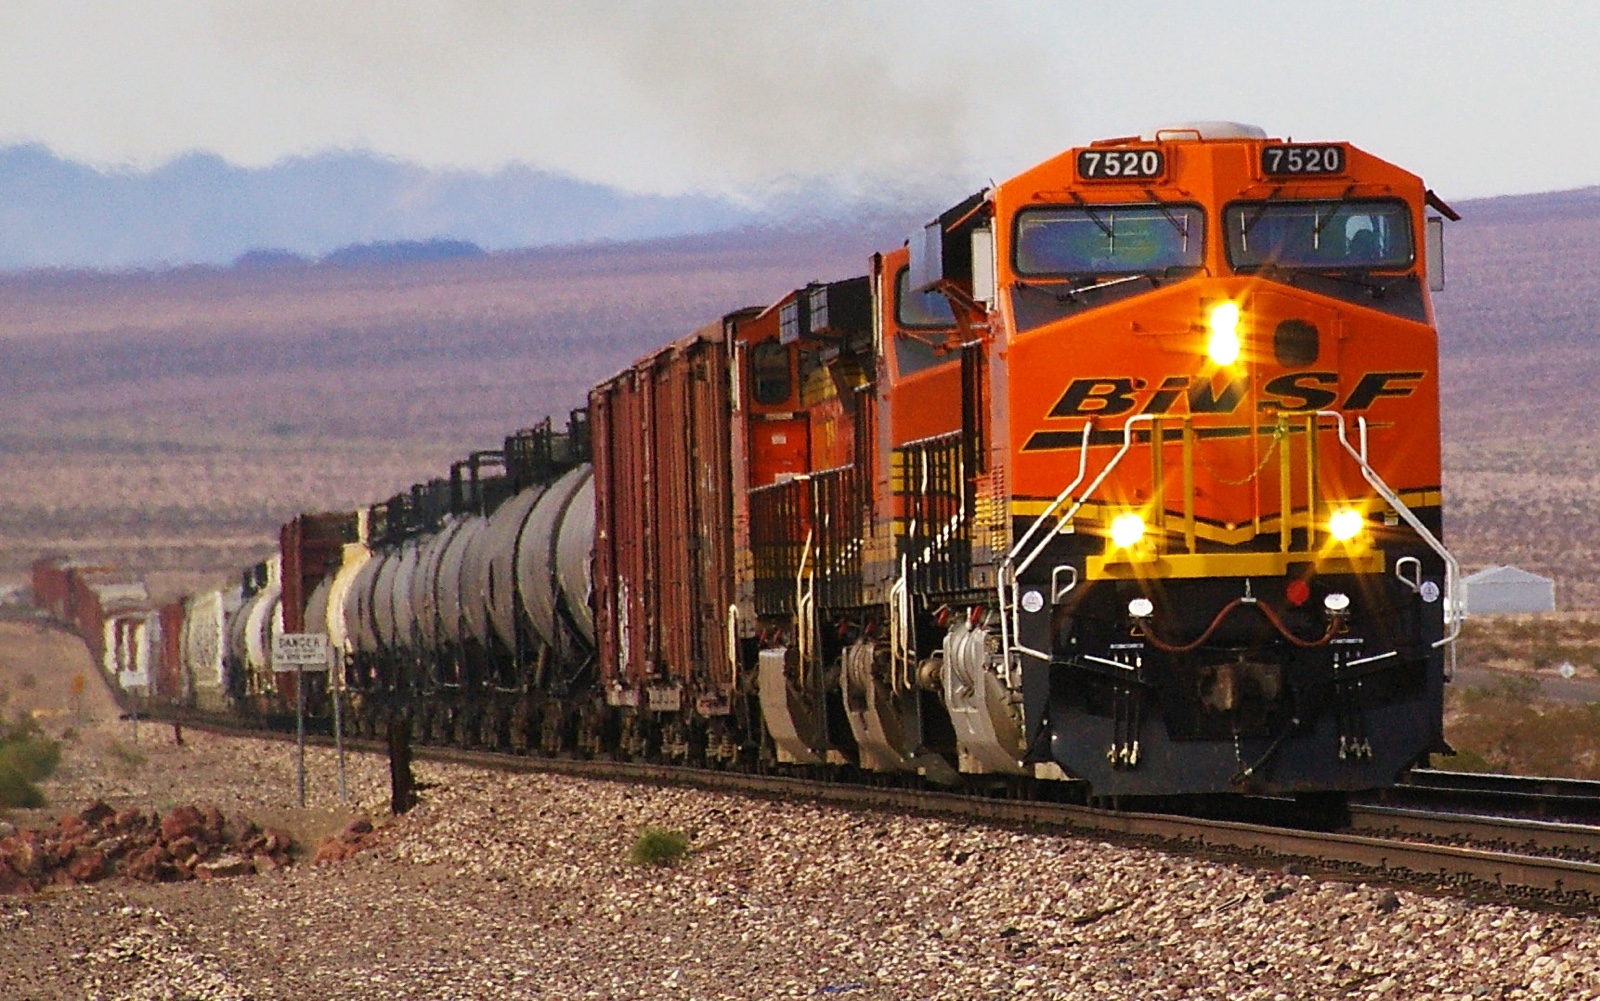 Photo of a BNSF train taken by Flickr user Ron Reiring